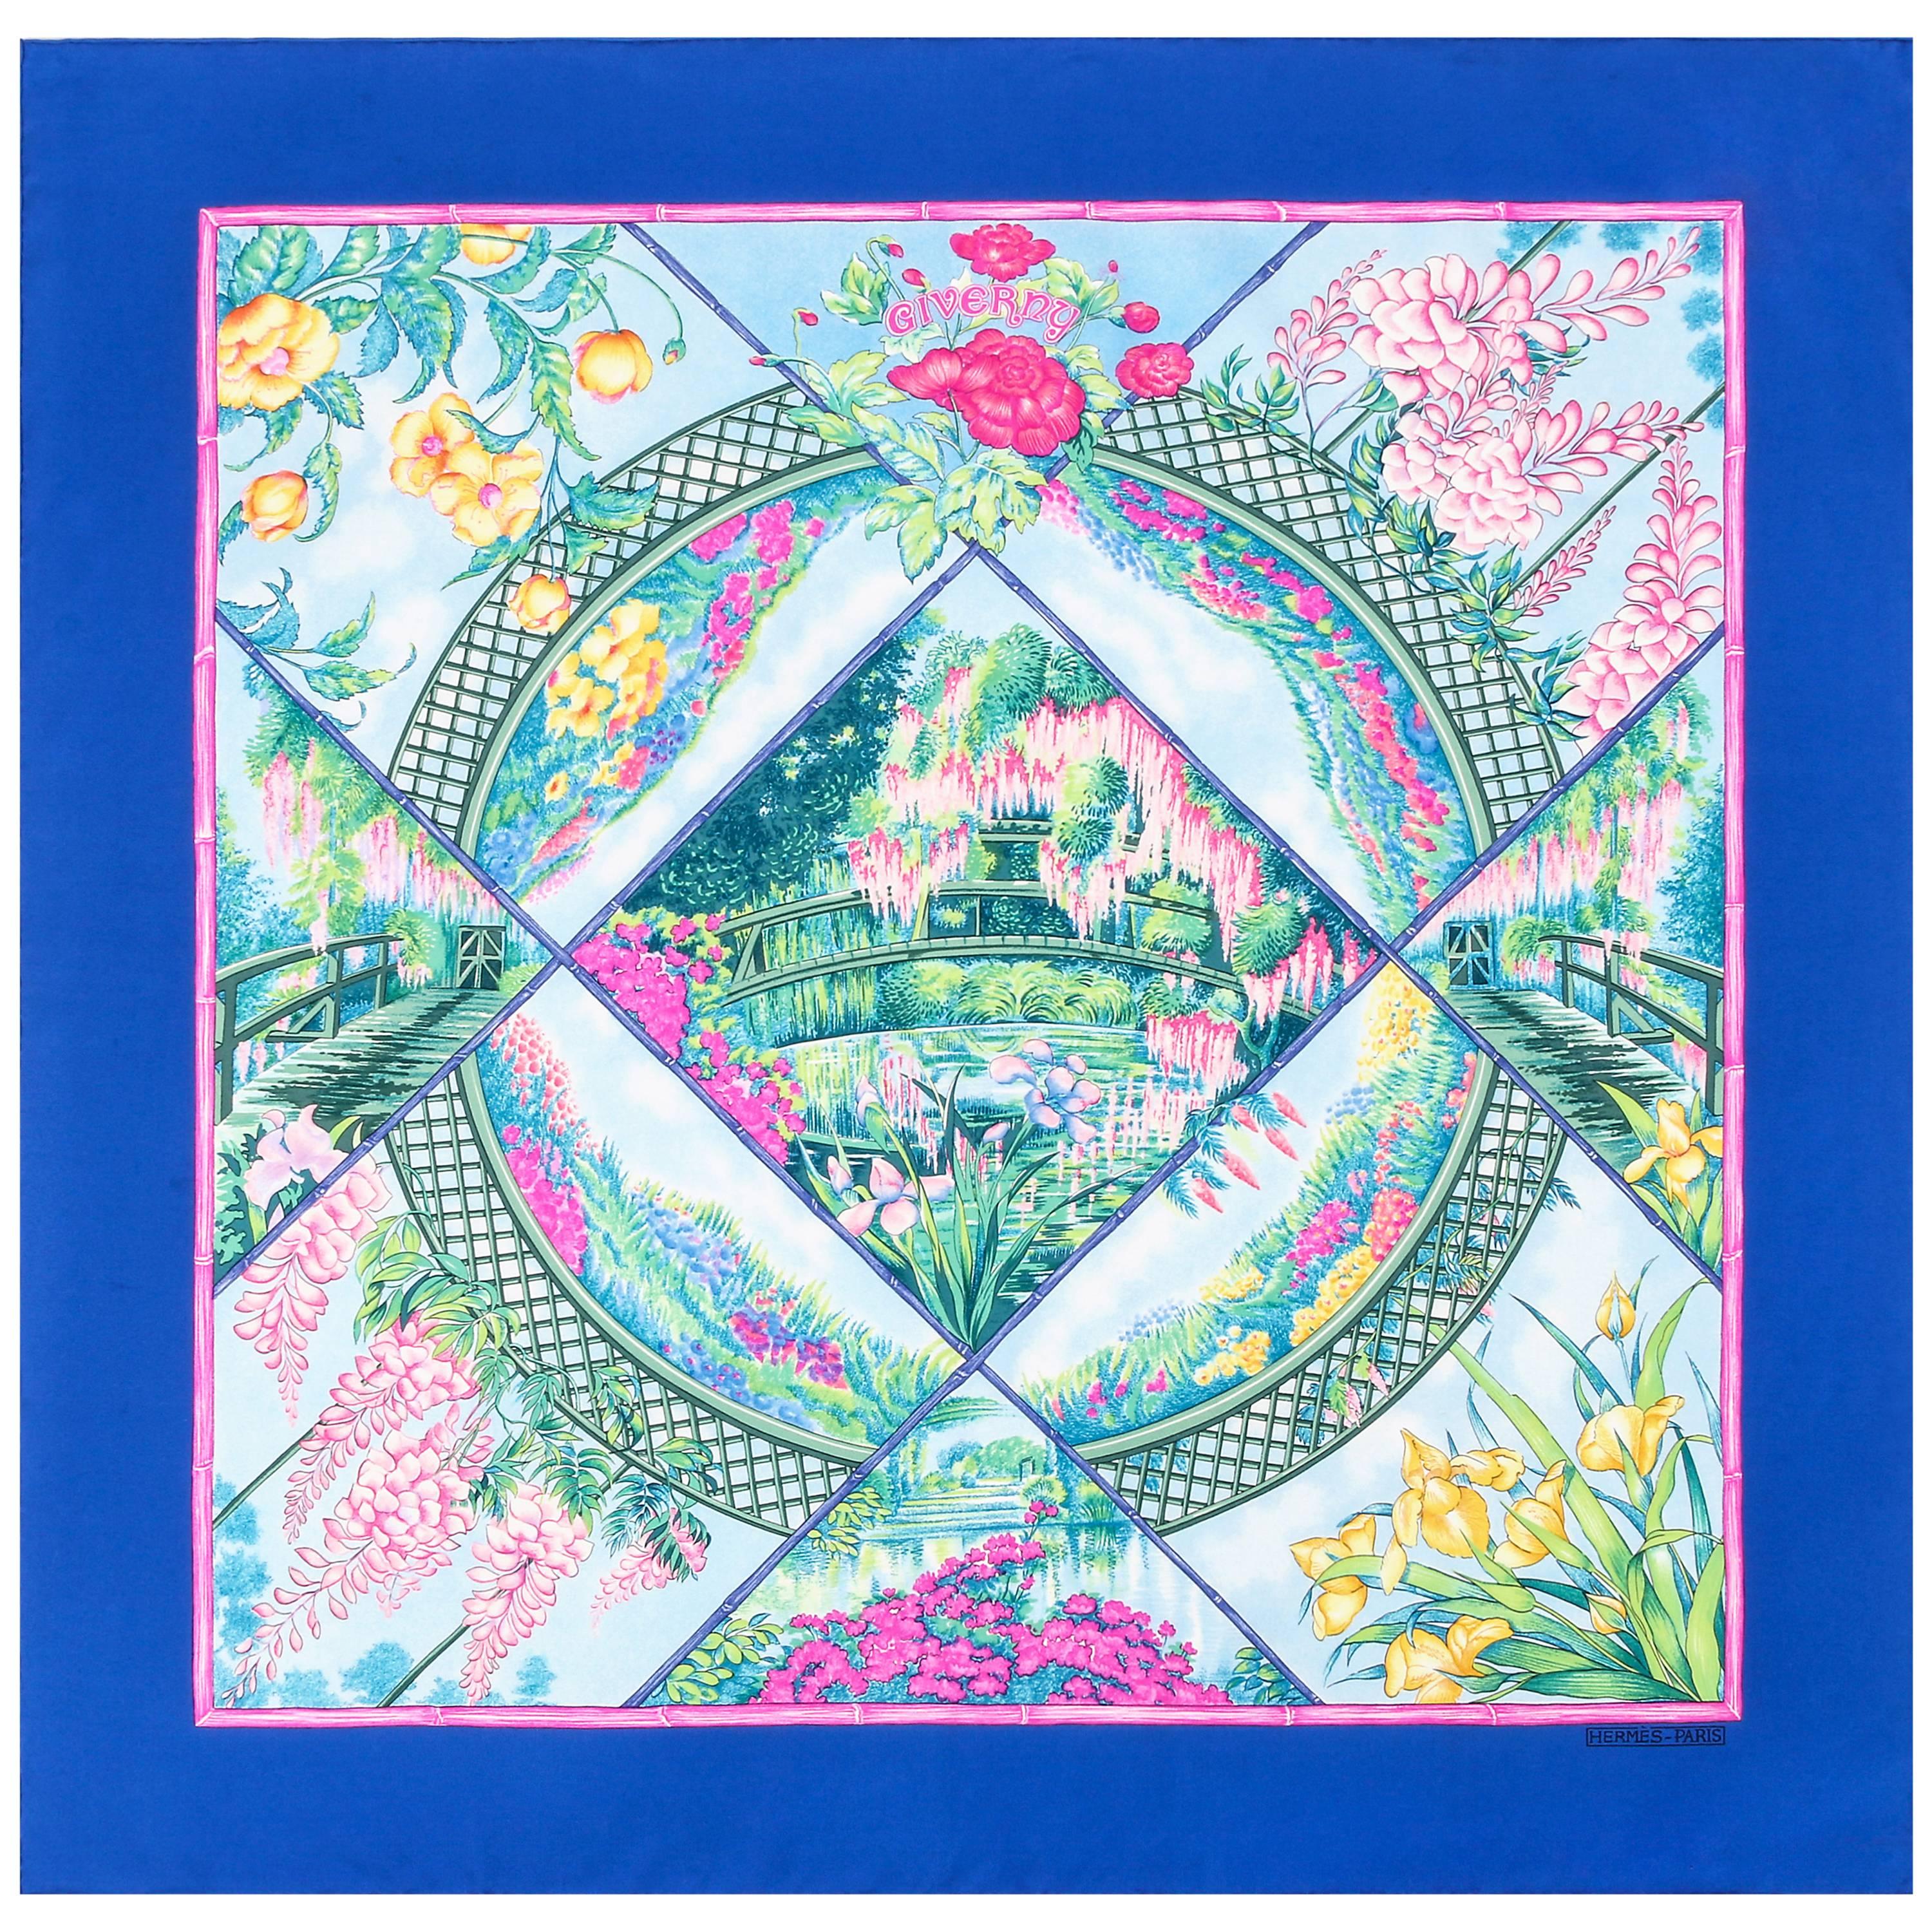 HERMES c.1989 Lawrence Bourthoumieux "Giverny" Blue Floral Print 100% Silk Scarf